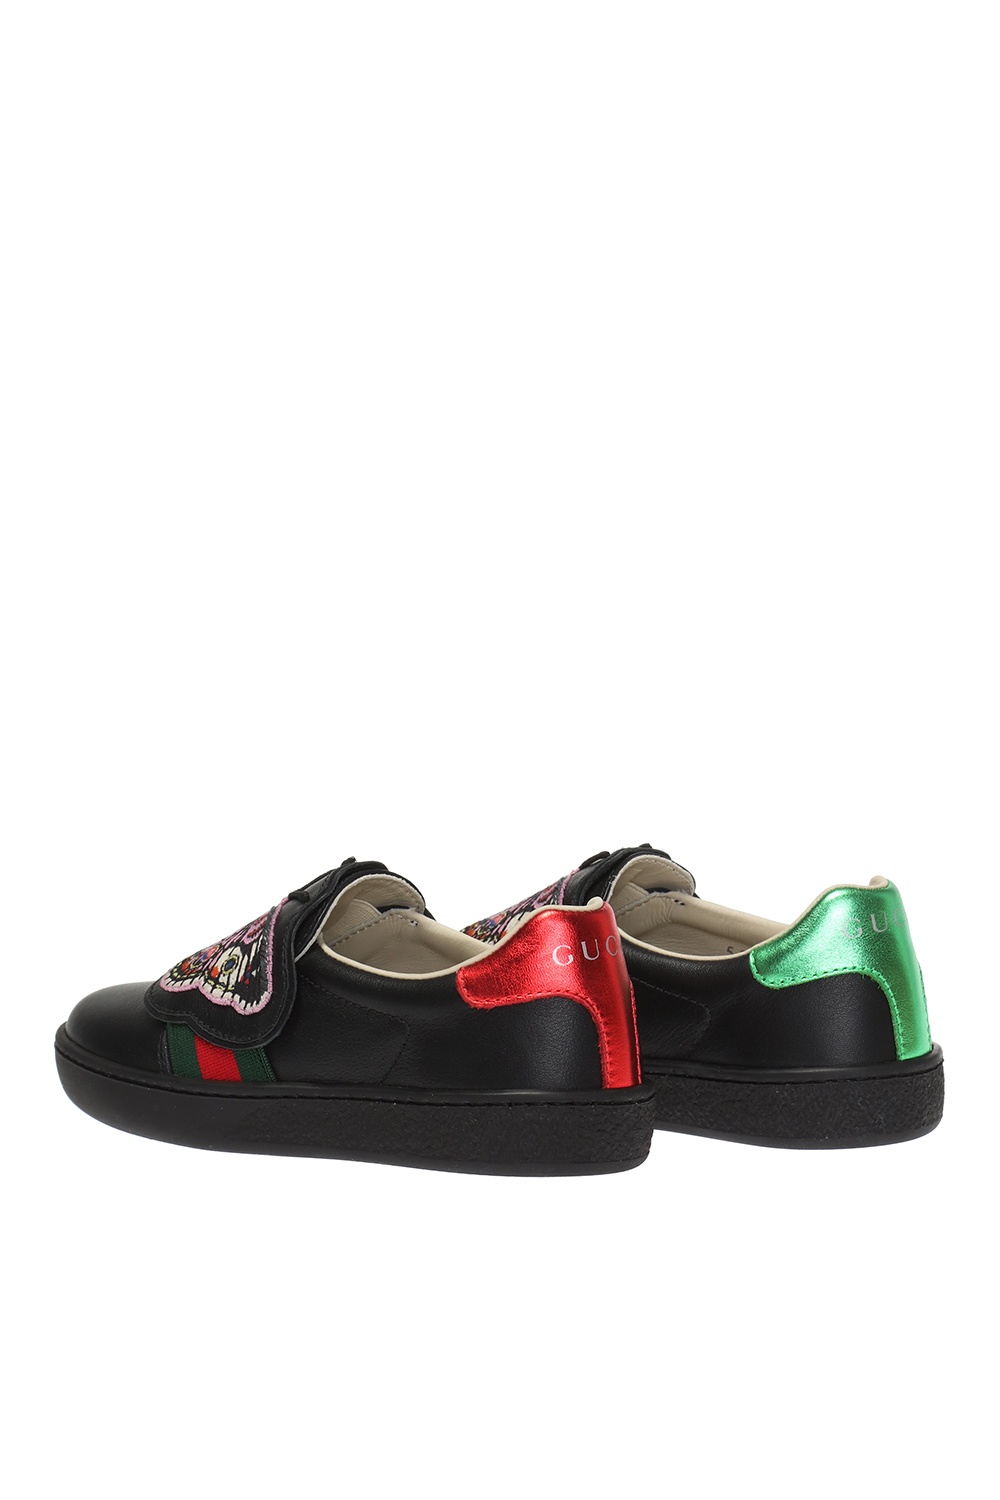 gucci sneakers with butterfly